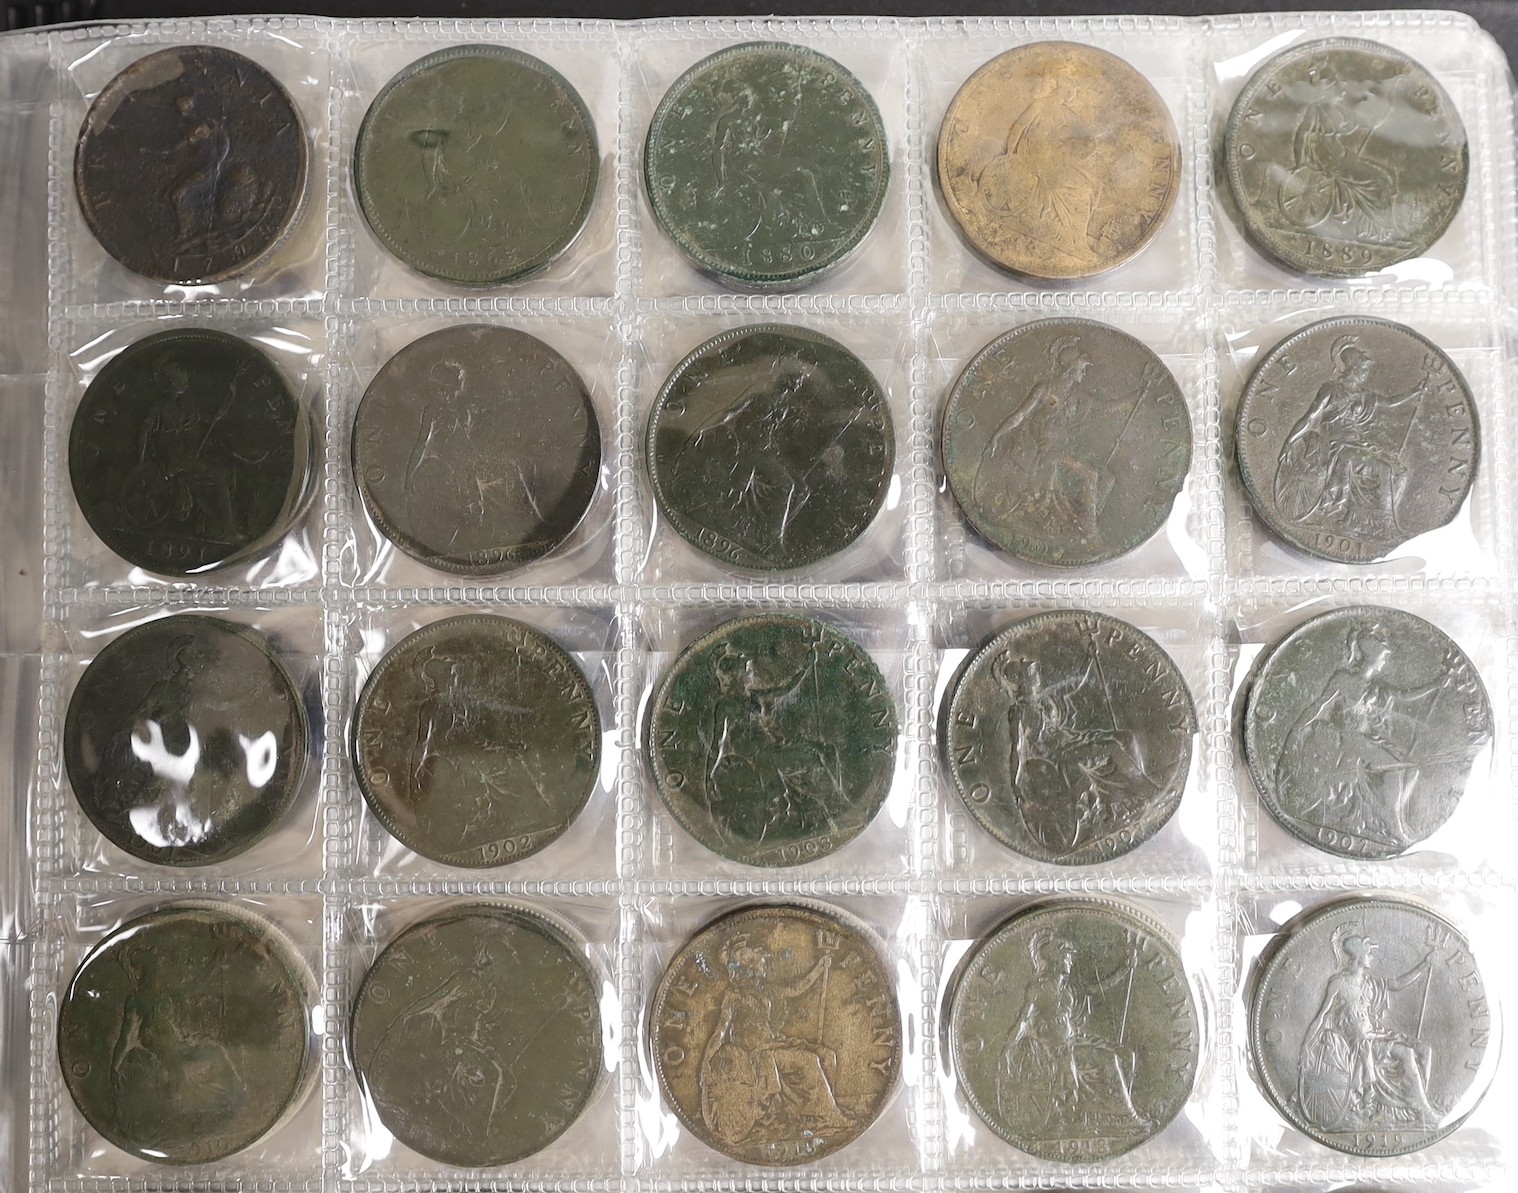 A collection of 20th century coinage